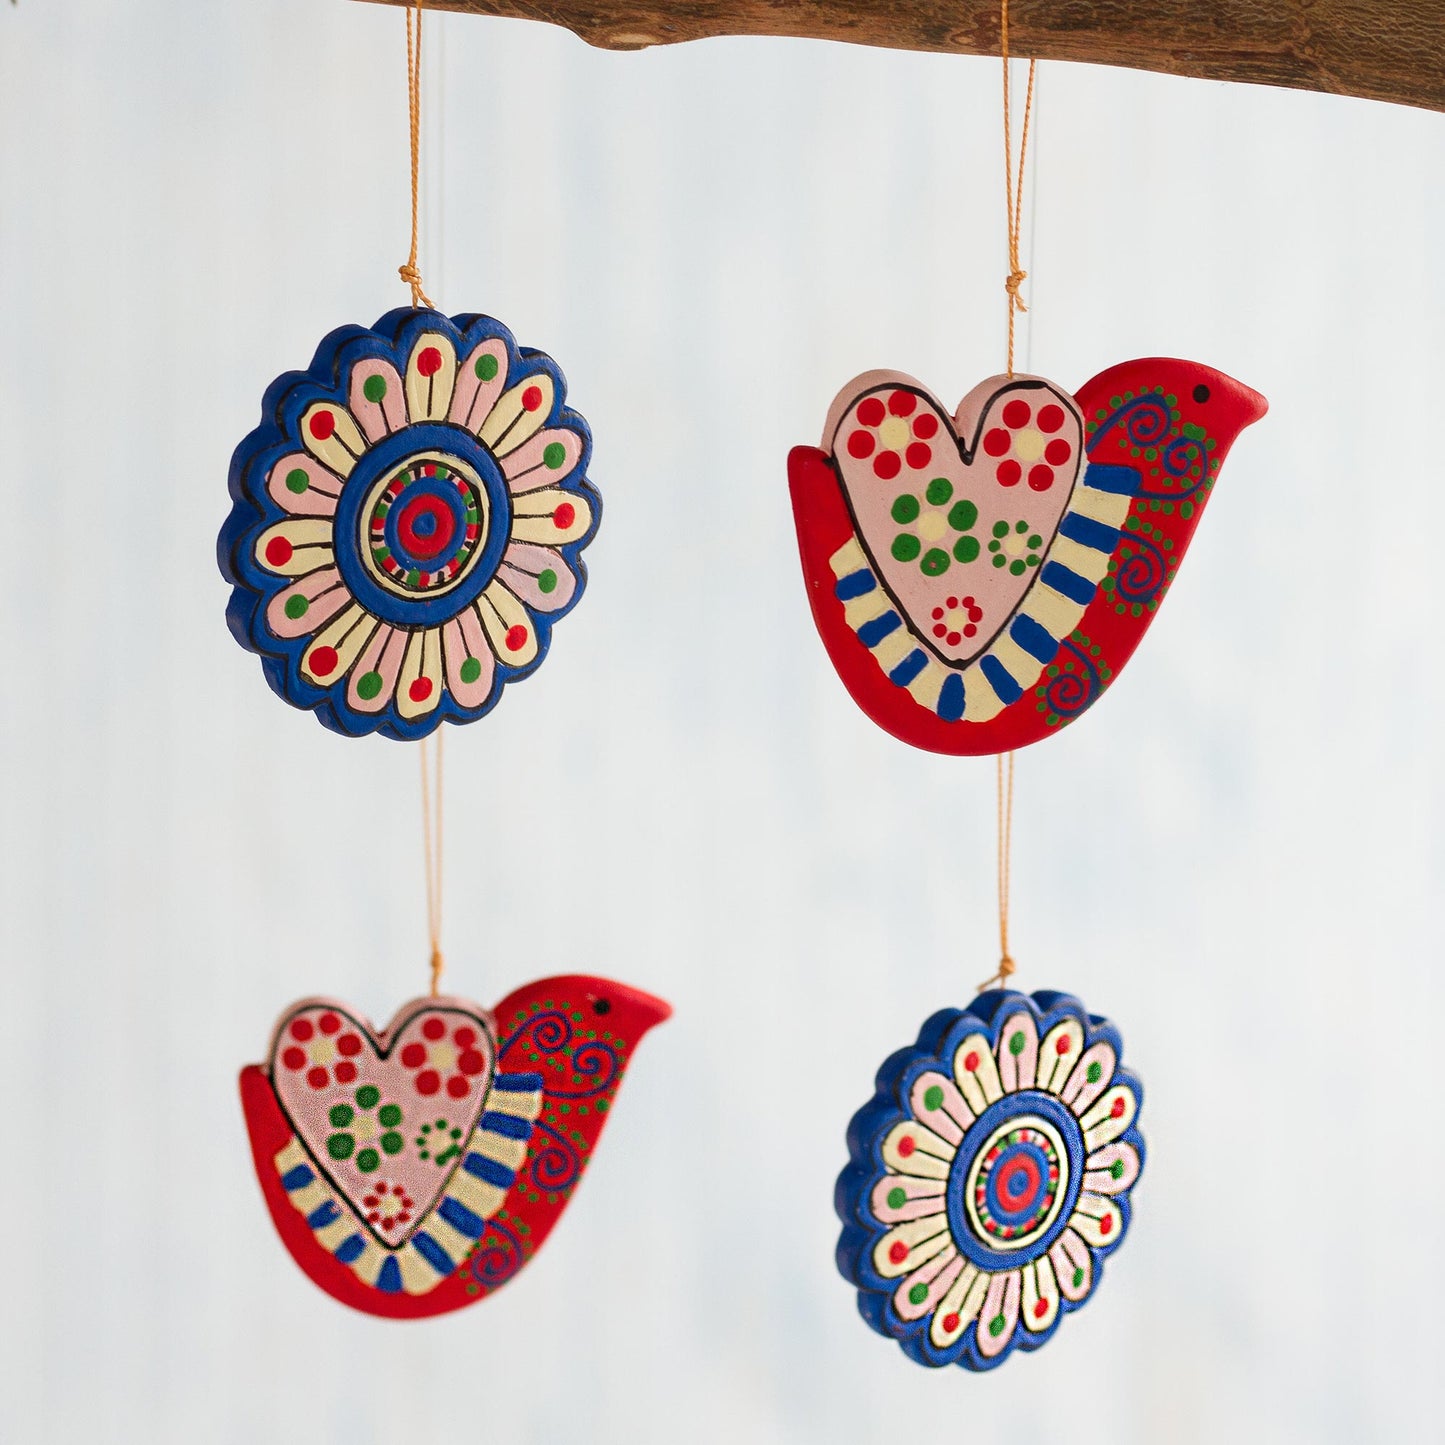 Doves and Flowers Hand-Painted Ceramic Dove and Flower Ornaments (Set of 4)